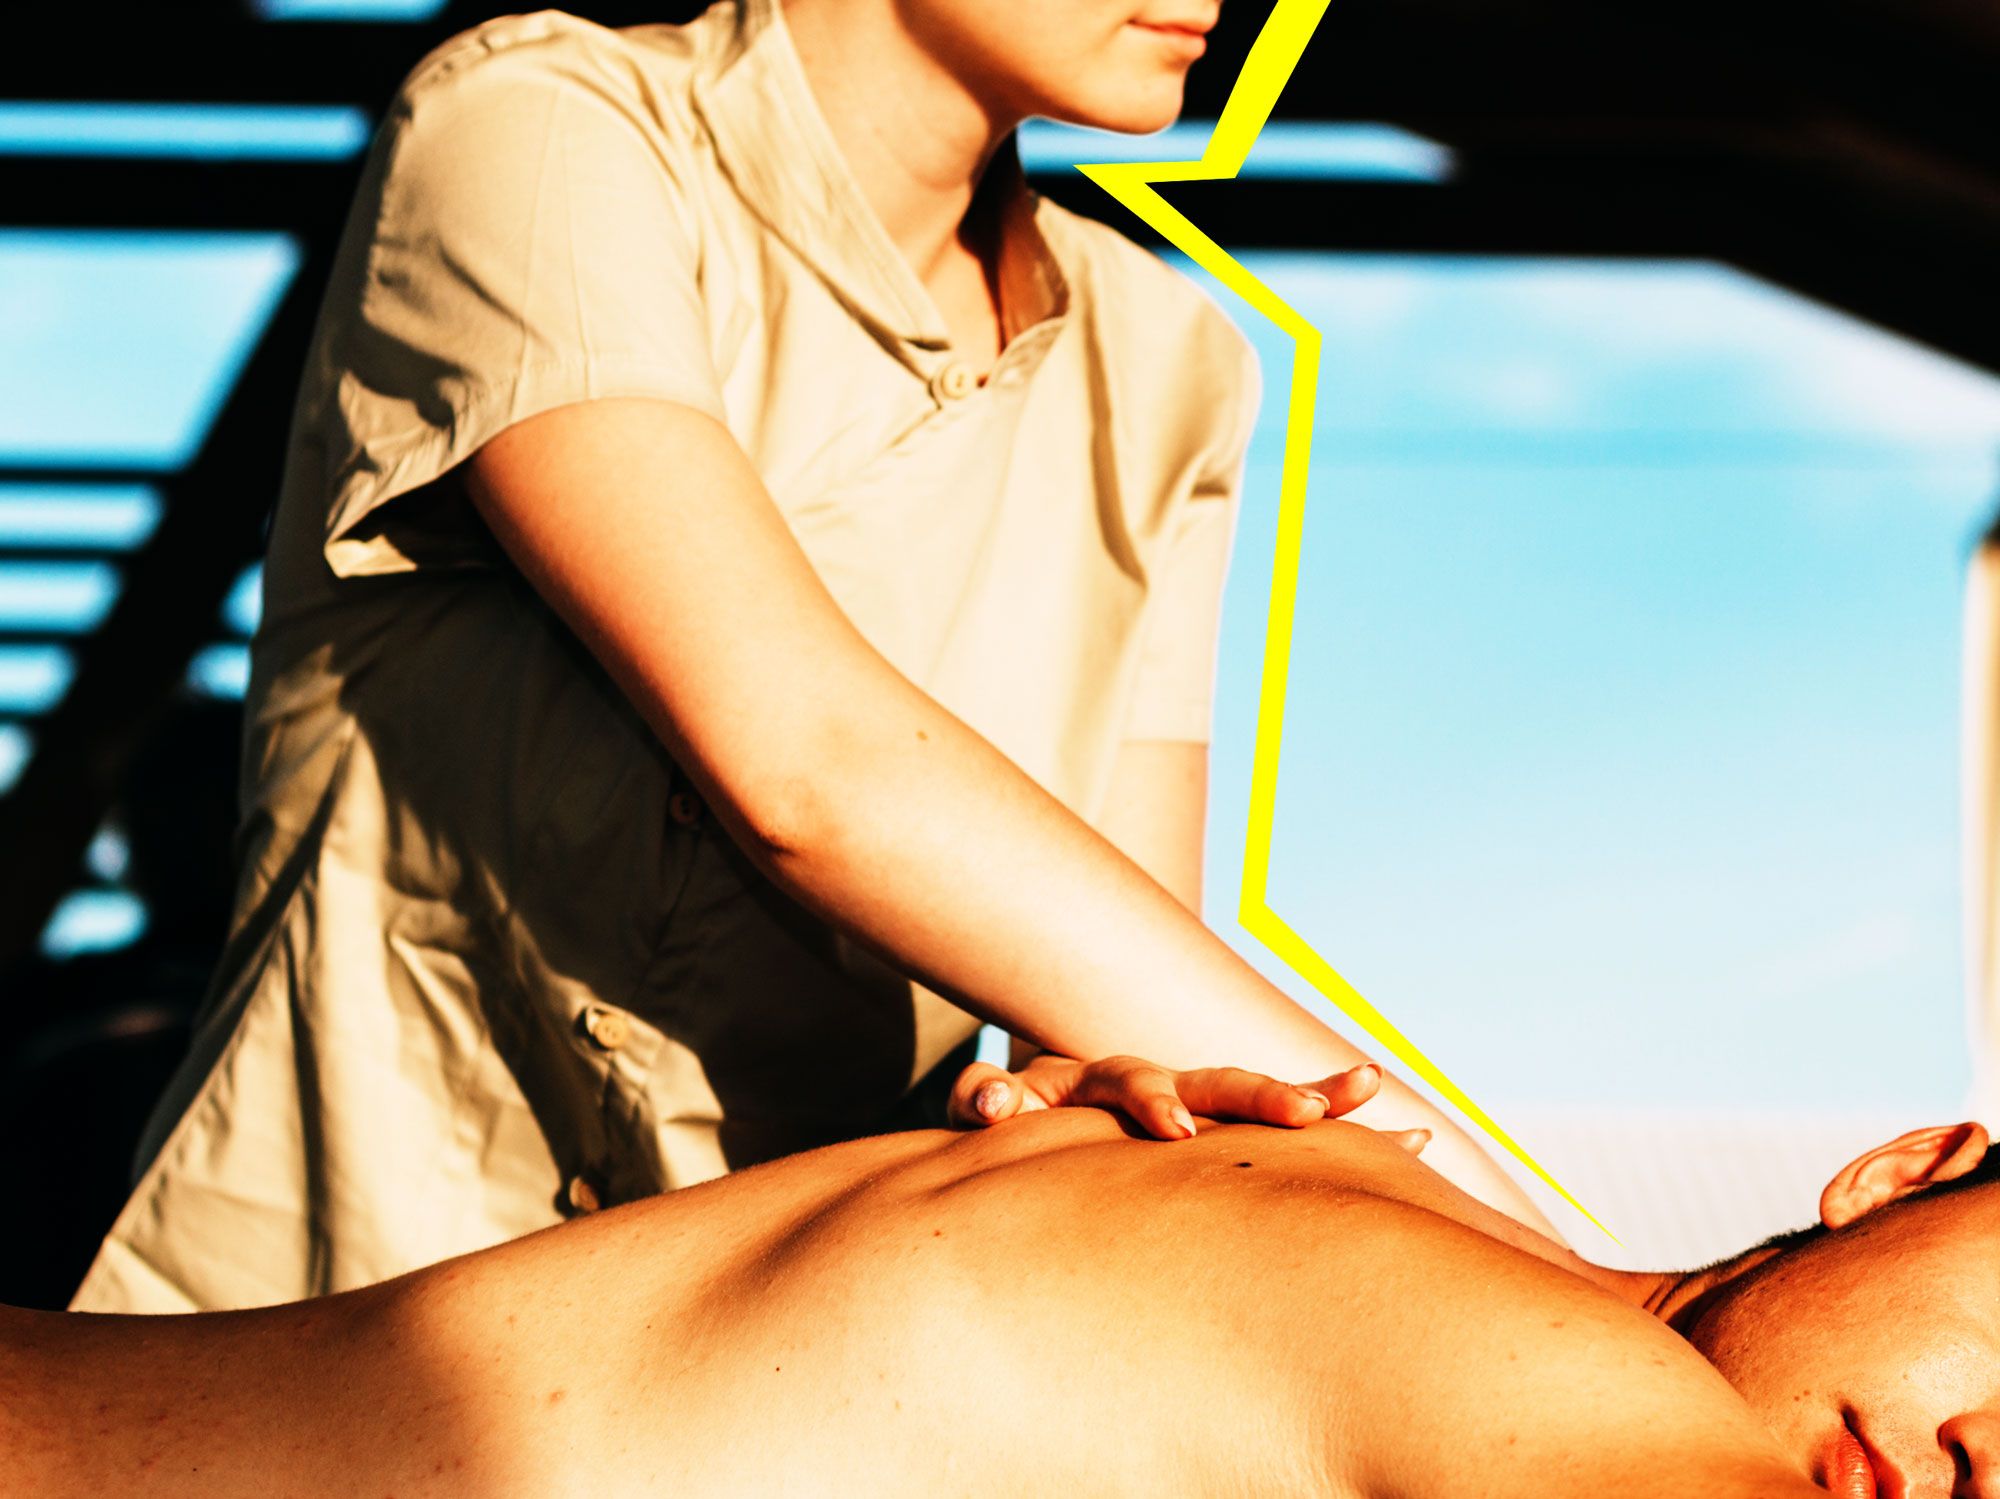 12 Massage Therapists On Sexual Harassment at Work